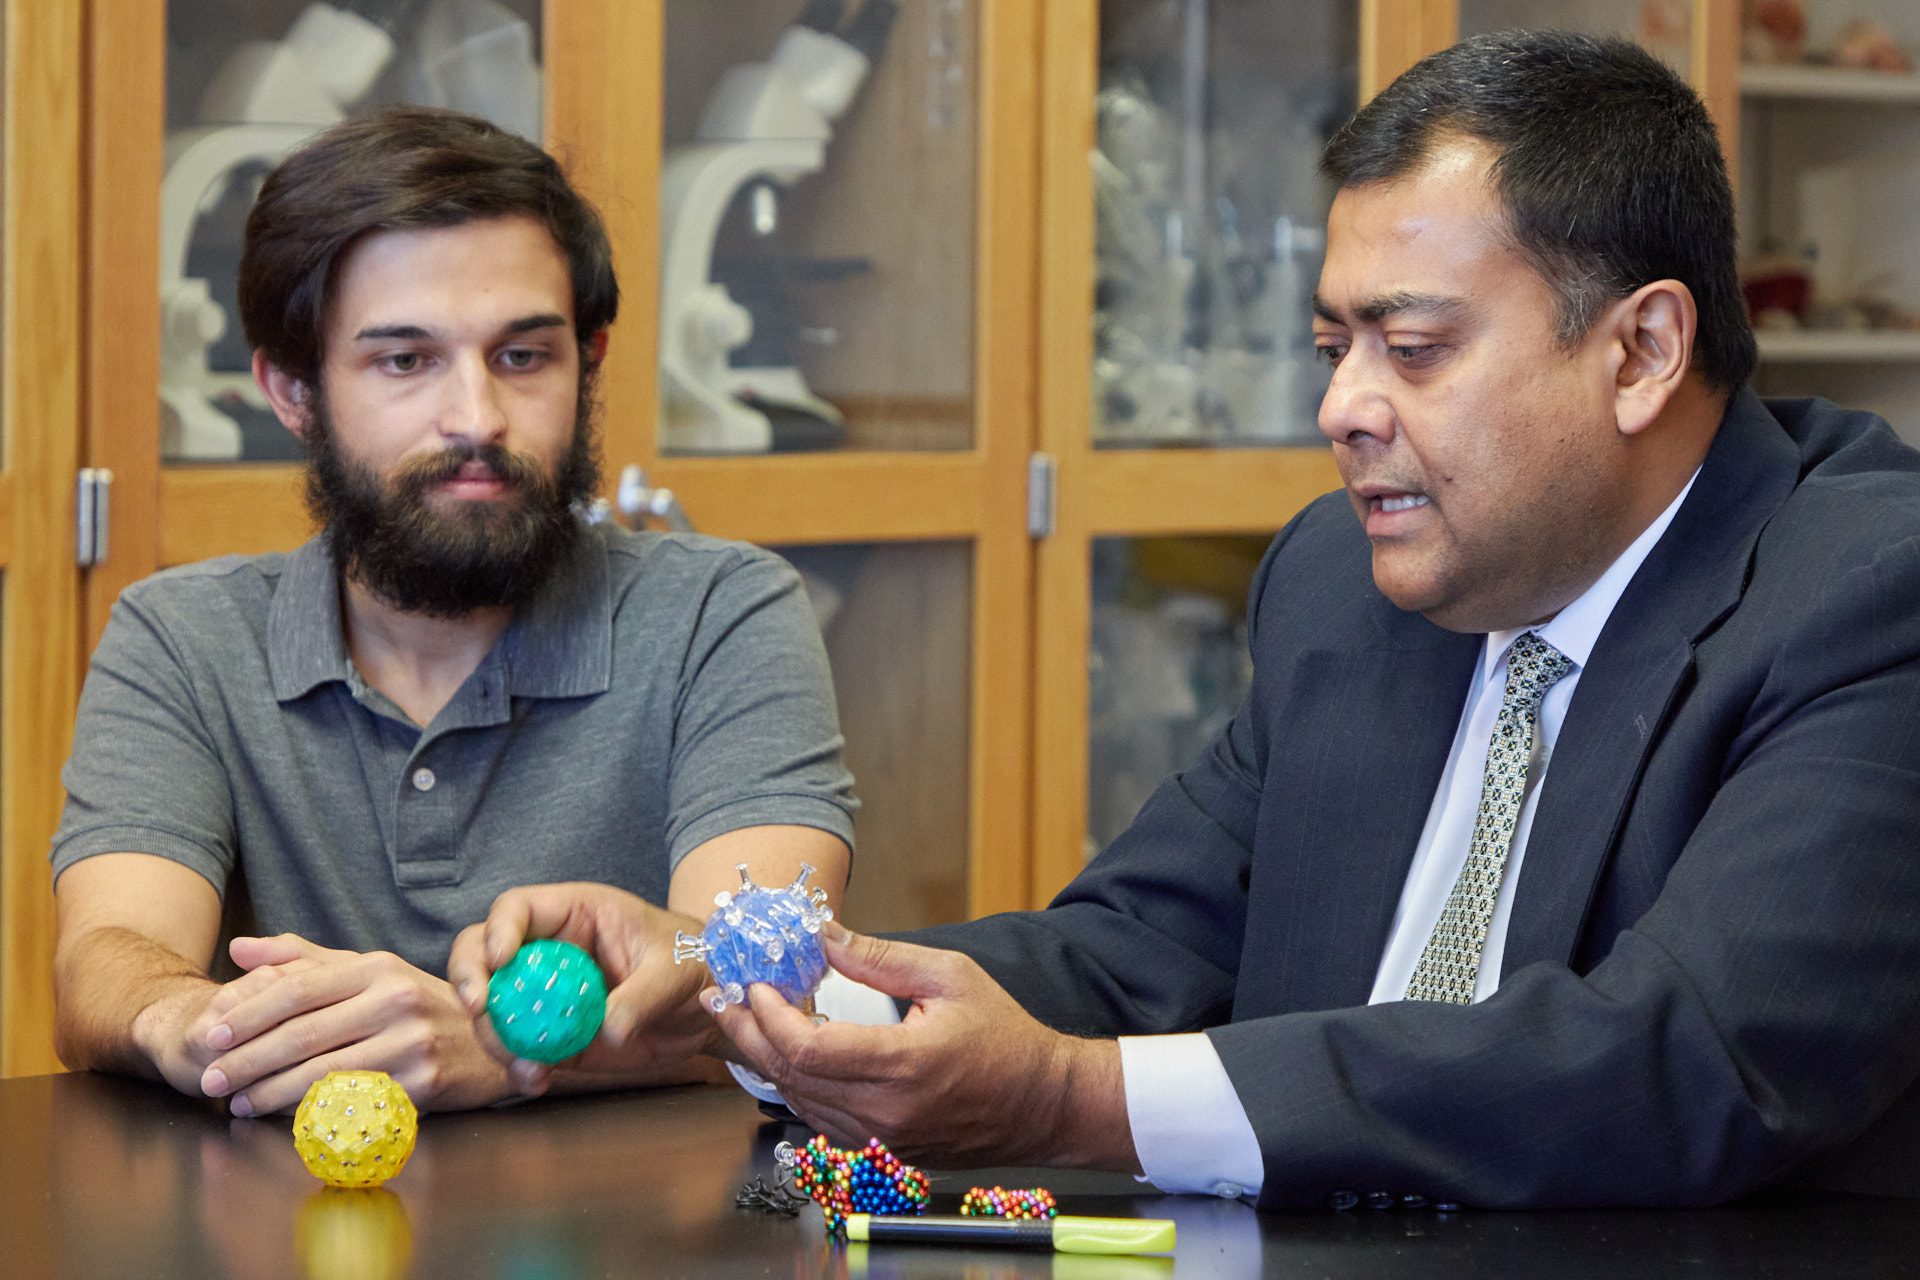 Kaustubha Qanungo, a lecturer in the Clemson University College of Science, uses magnetic fidget toys to help teach the structure of viruses to his Introduction to Virology class